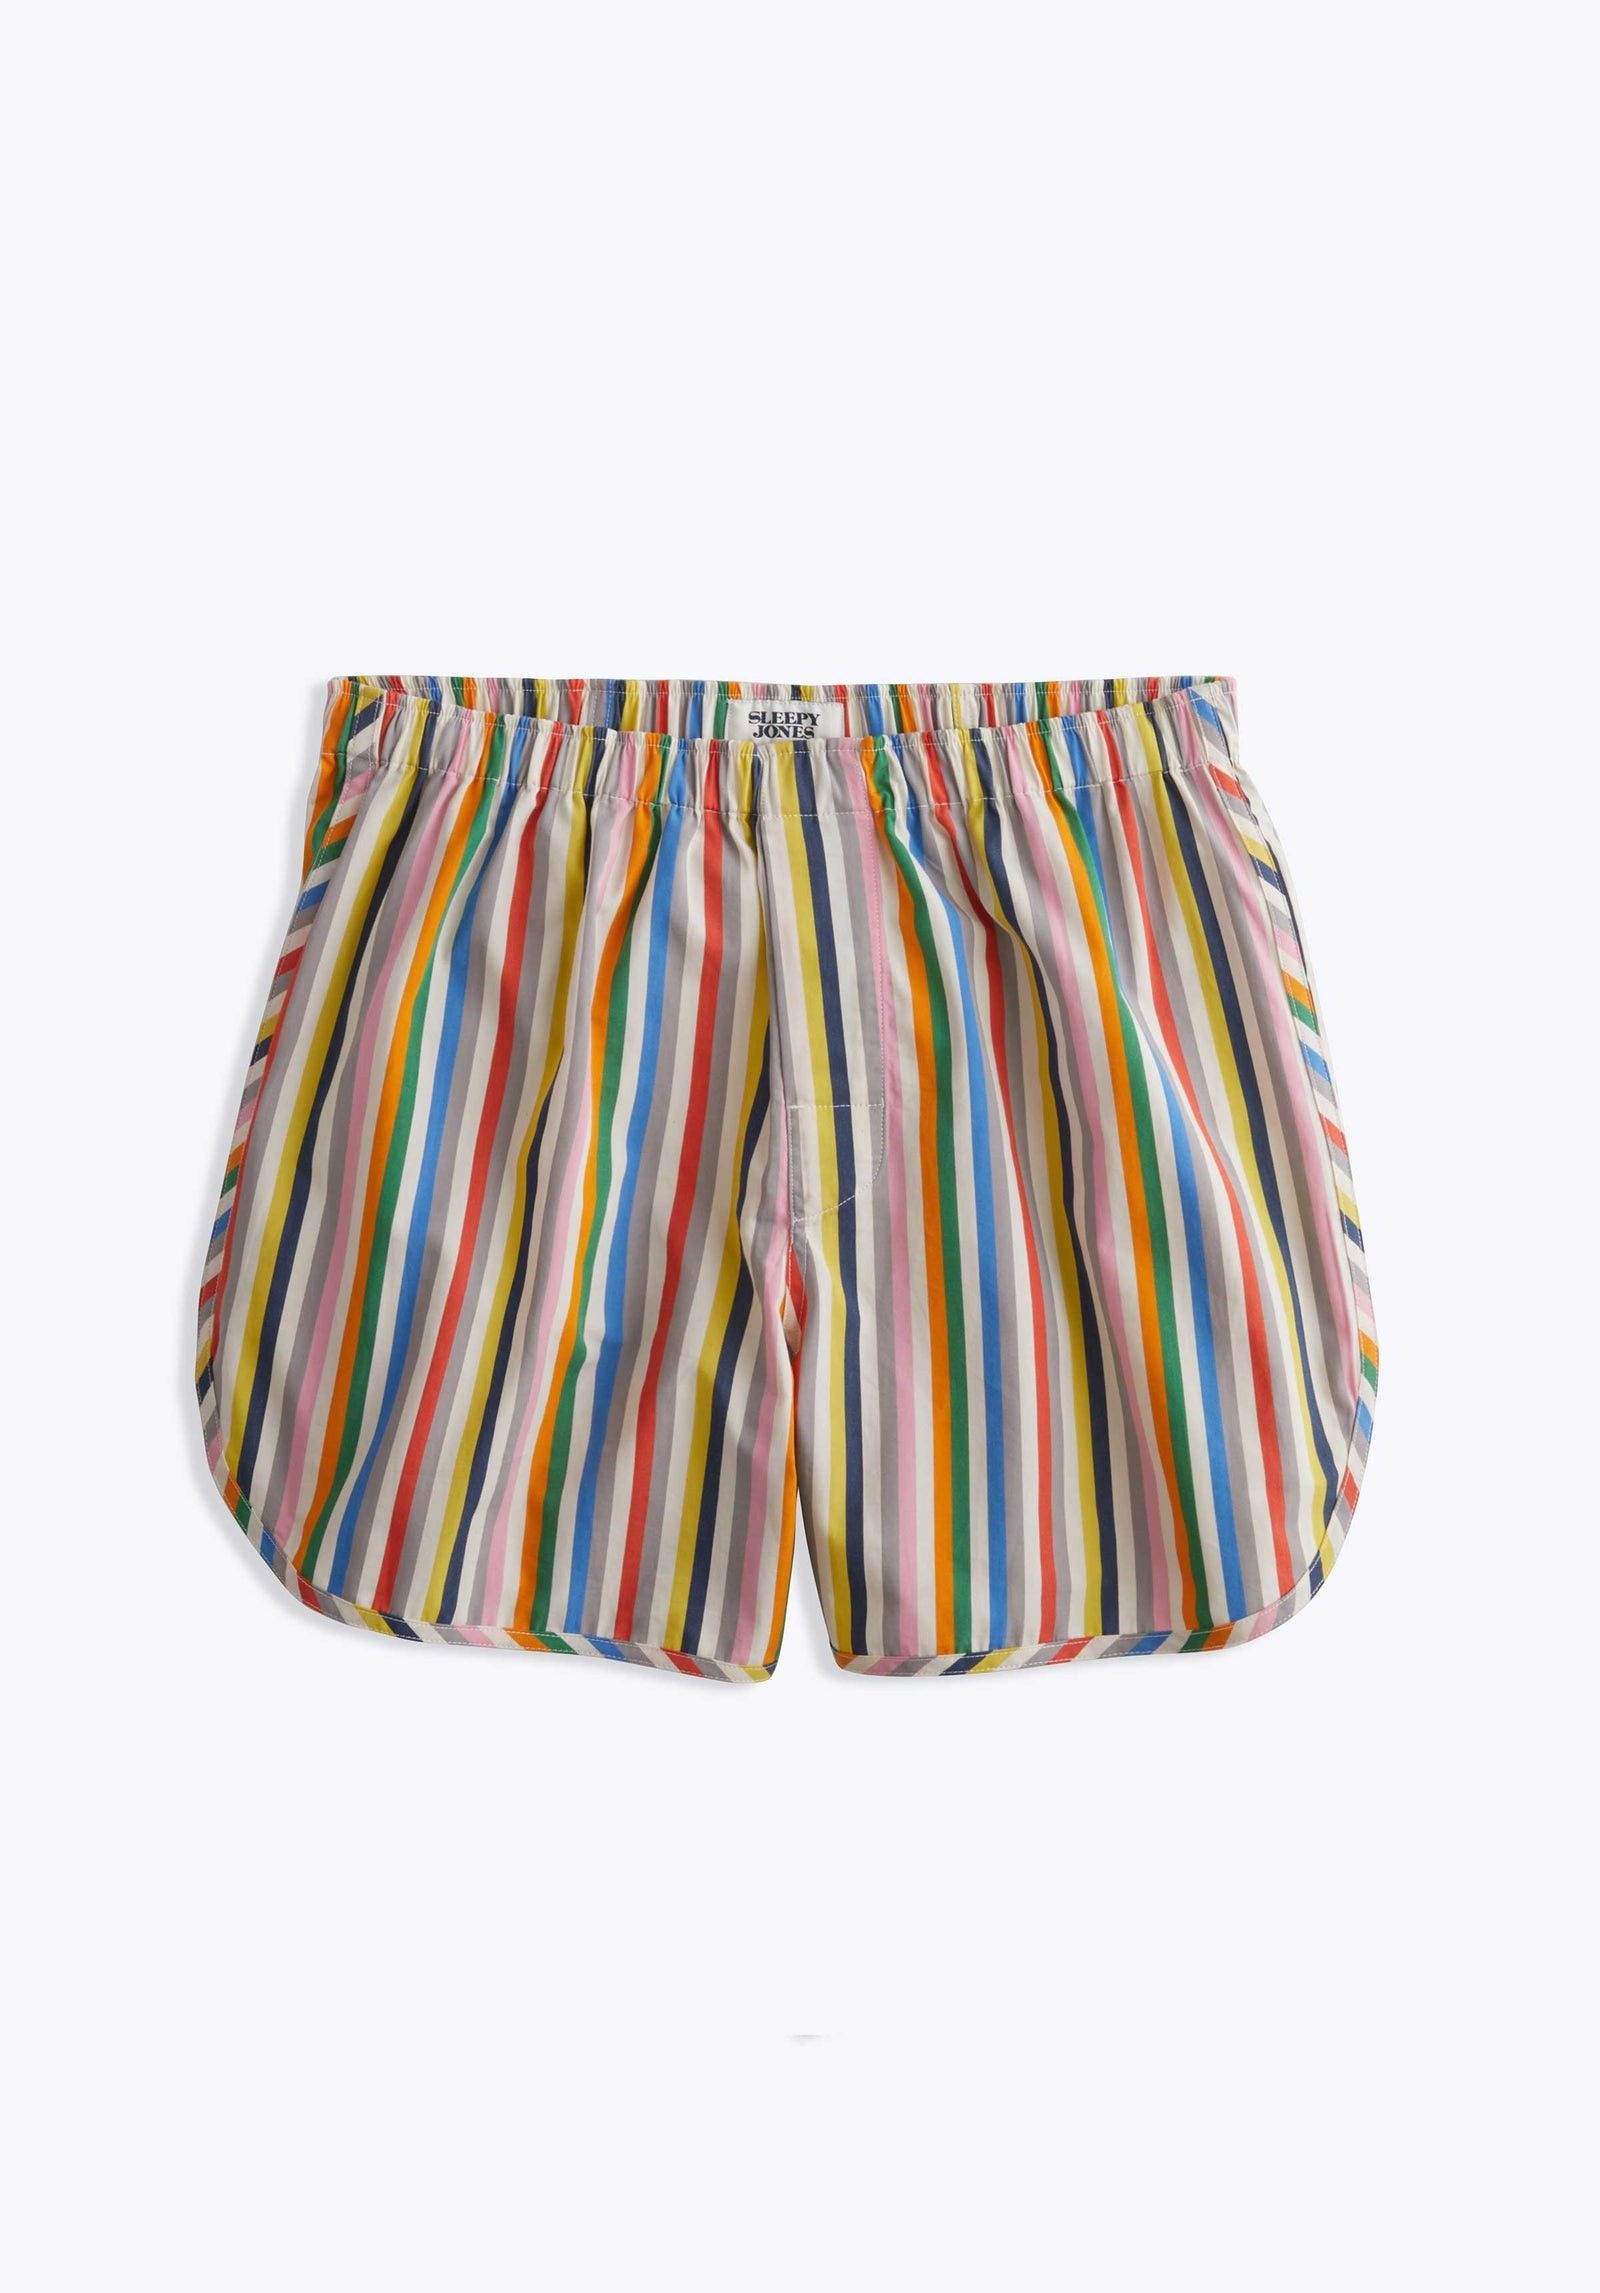 10 Easy Ways To Style The Boxer Shorts Trend For Summer - Brit + Co